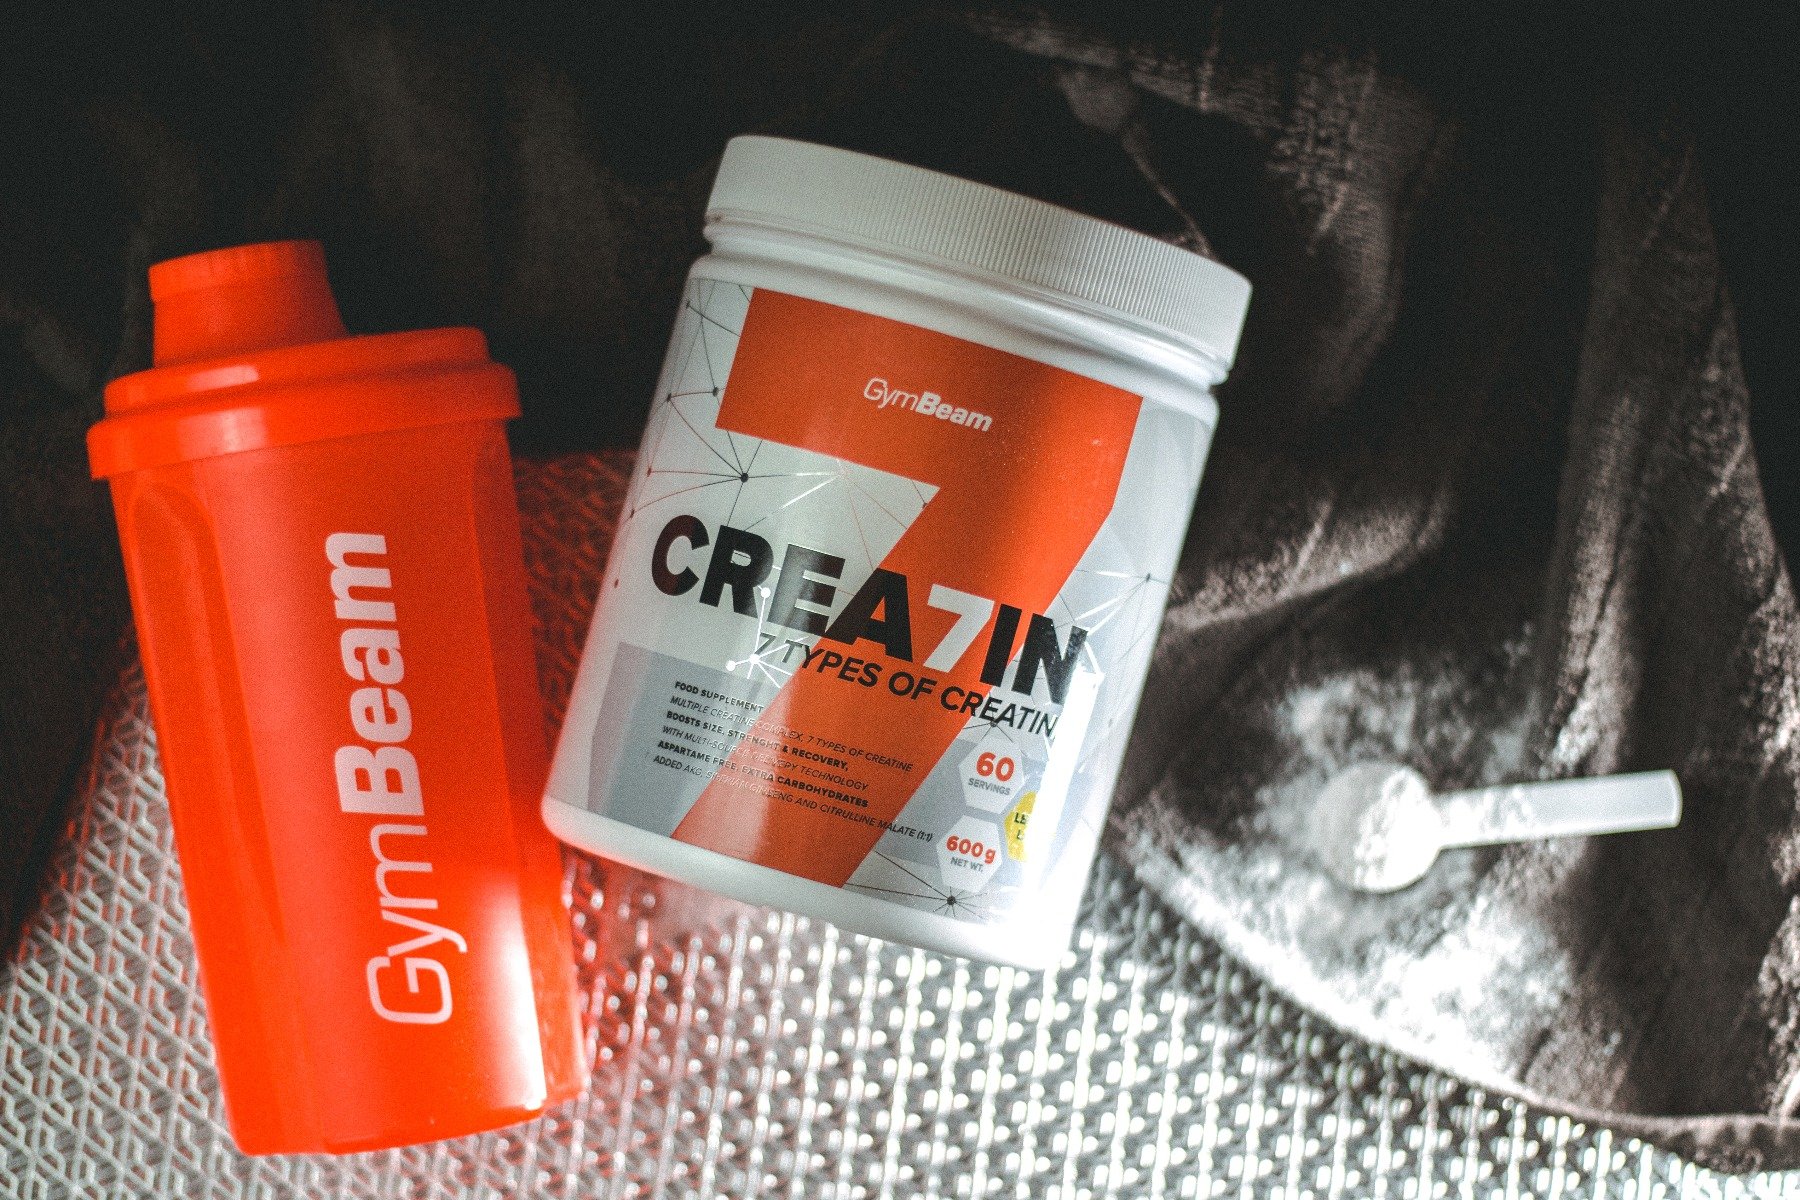 A Creatine Guide for Maximum Muscle Growth